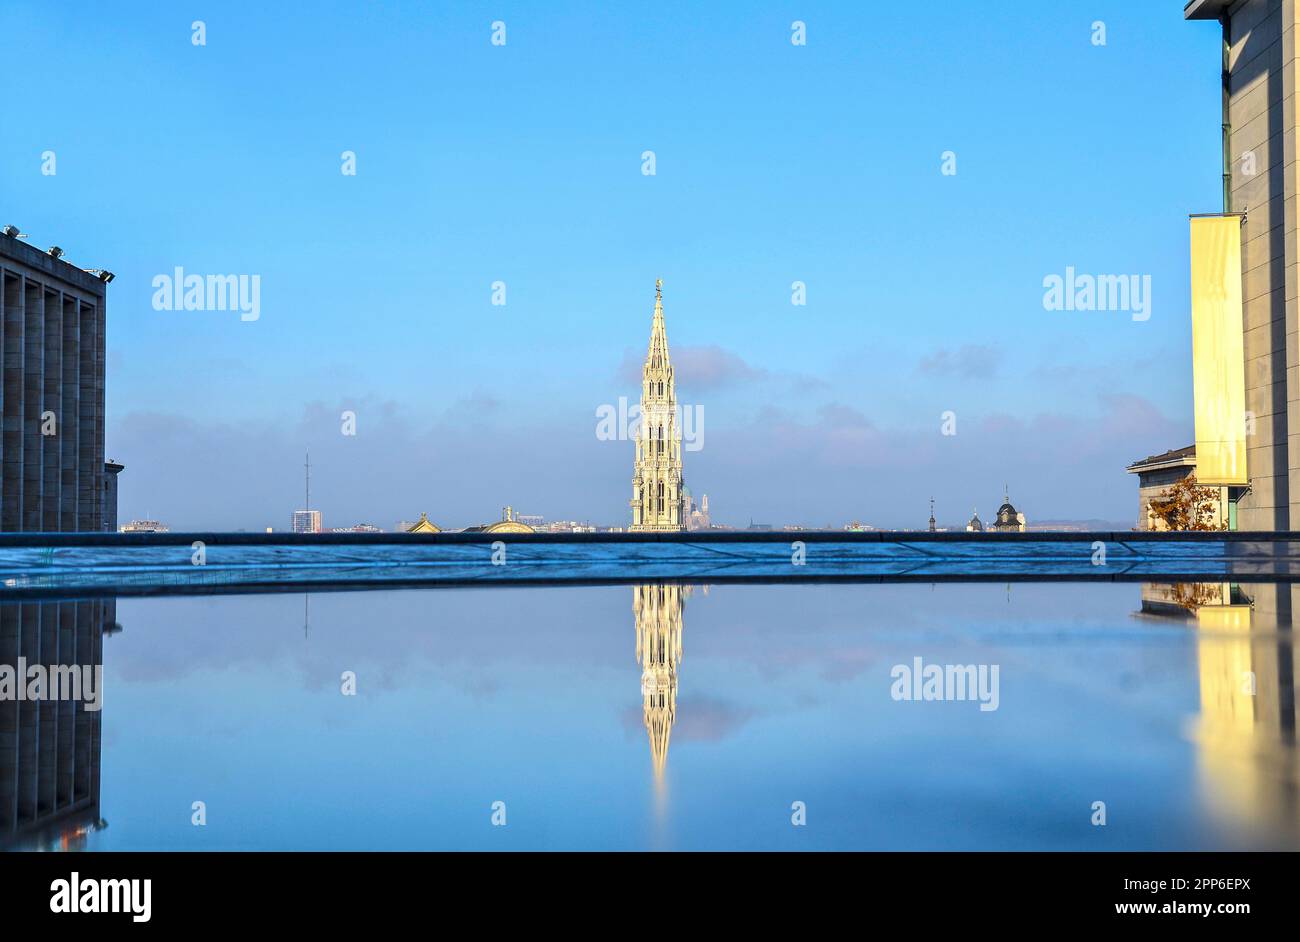 City hall tower, reflected in water Stock Photo